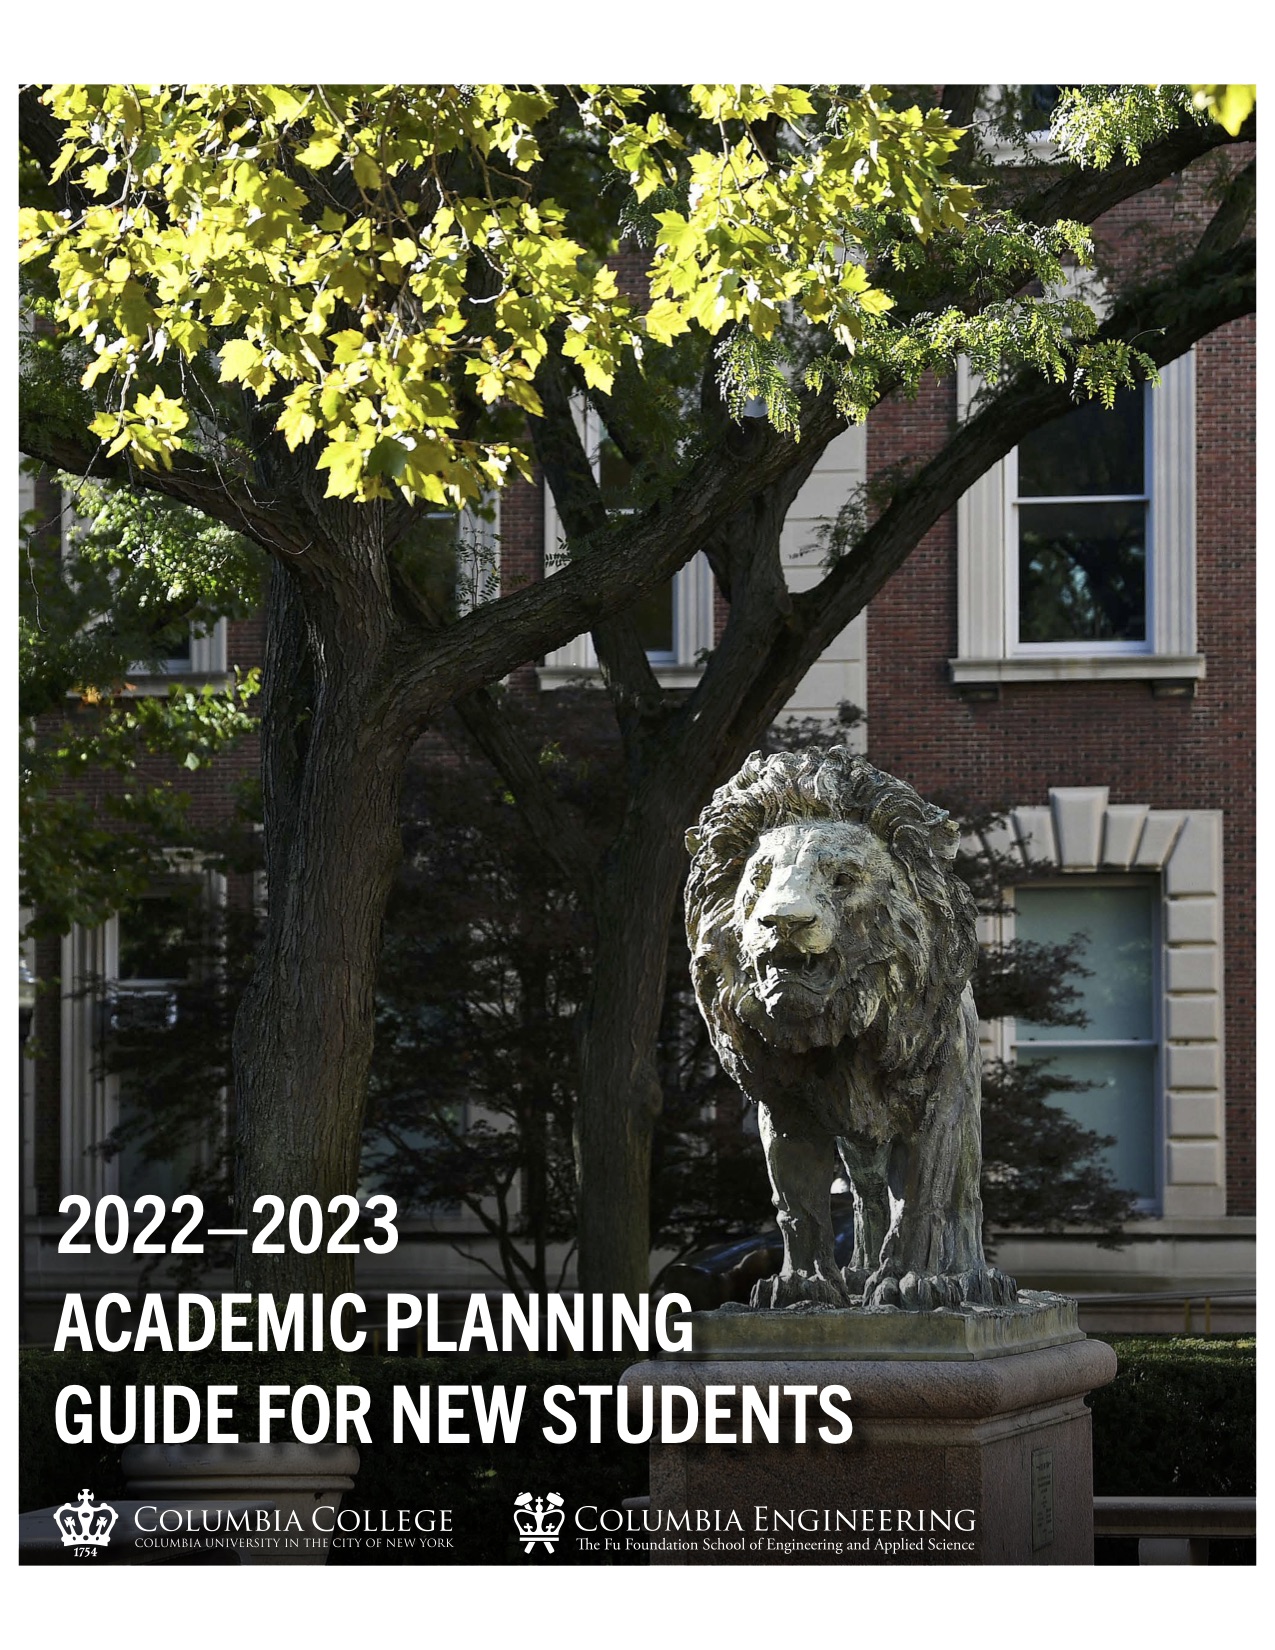 Academic Planning Guide 2022-2023